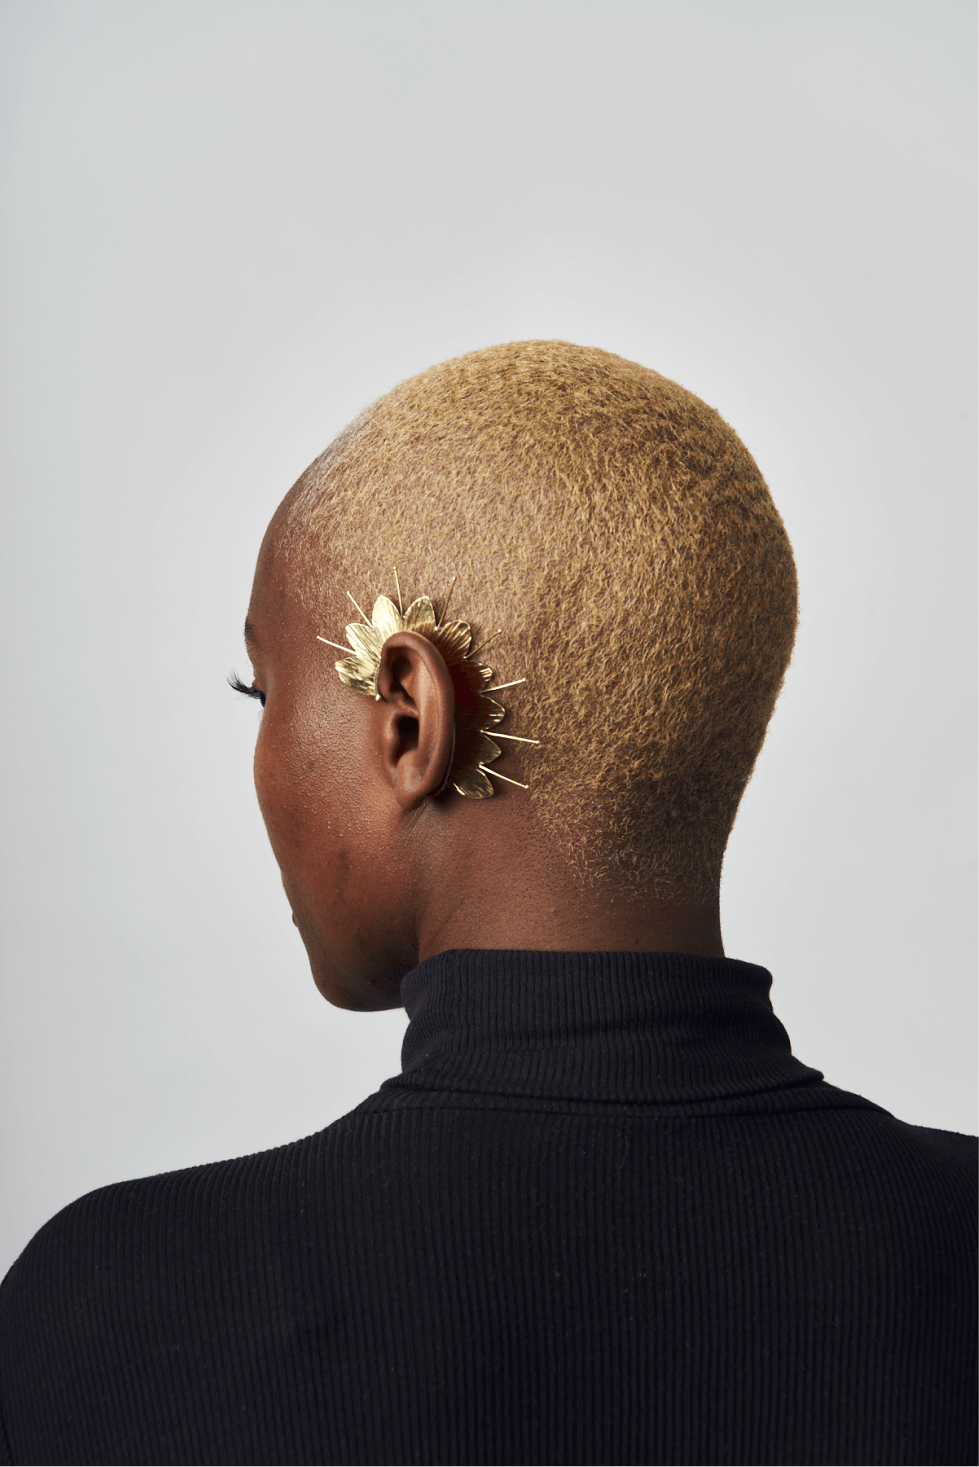 Shop Alizeti Ear Cuffs by Tiger Tail Twister on Arrai. Discover stylish, affordable clothing, jewelry, handbags and unique handmade pieces from top Kenyan & African fashion brands prioritising sustainability and quality craftsmanship.